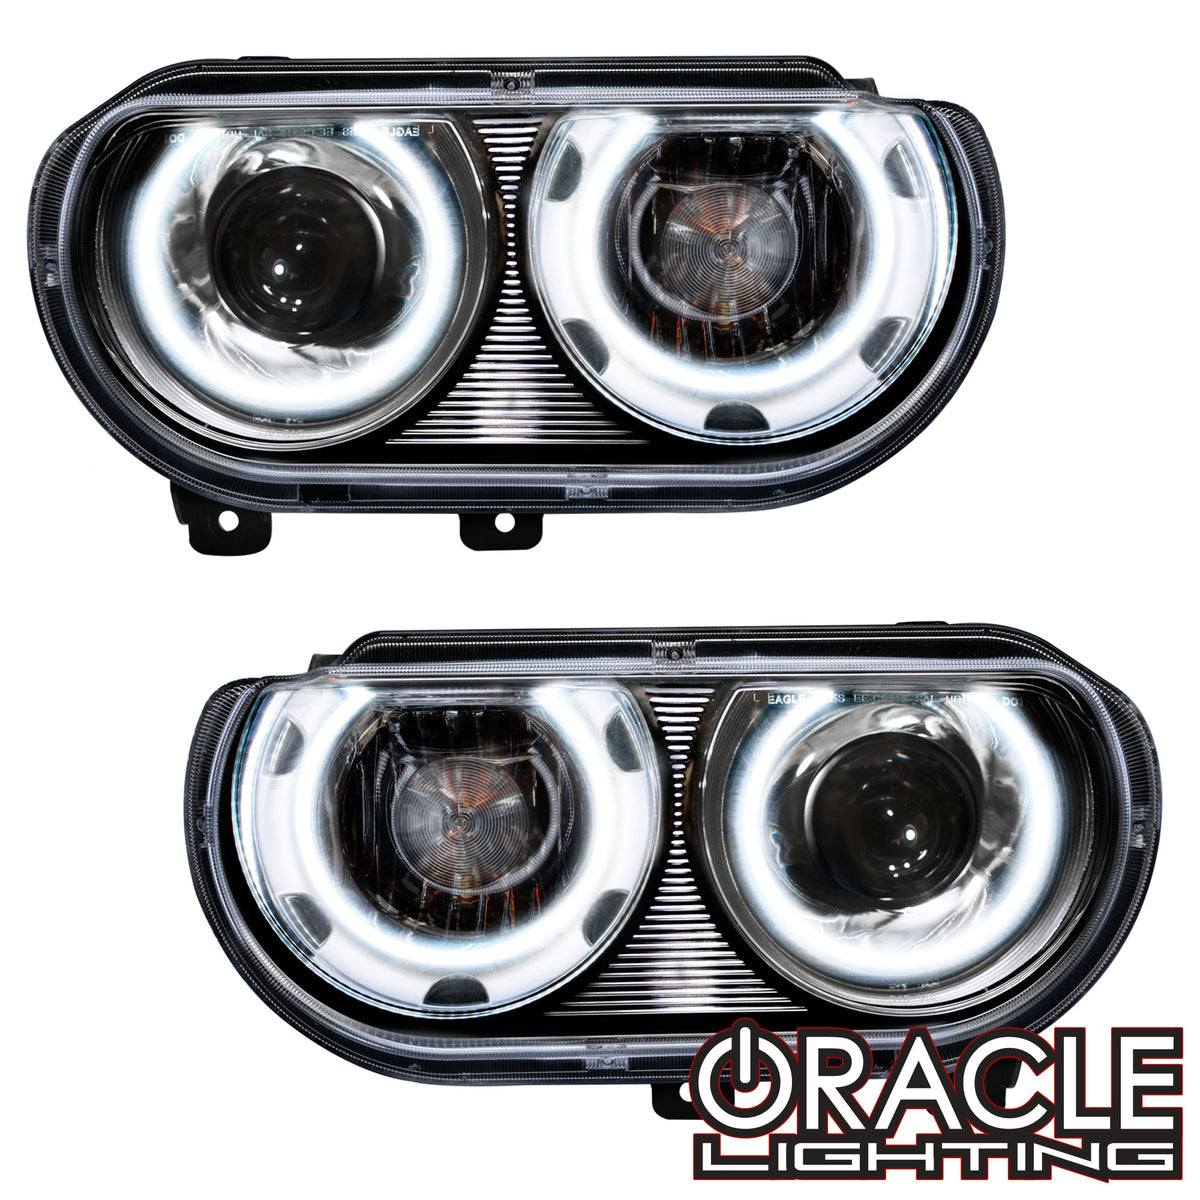 2008-2014 Dodge Challenger Pre-Assembled Headlights - HID | ORACLE